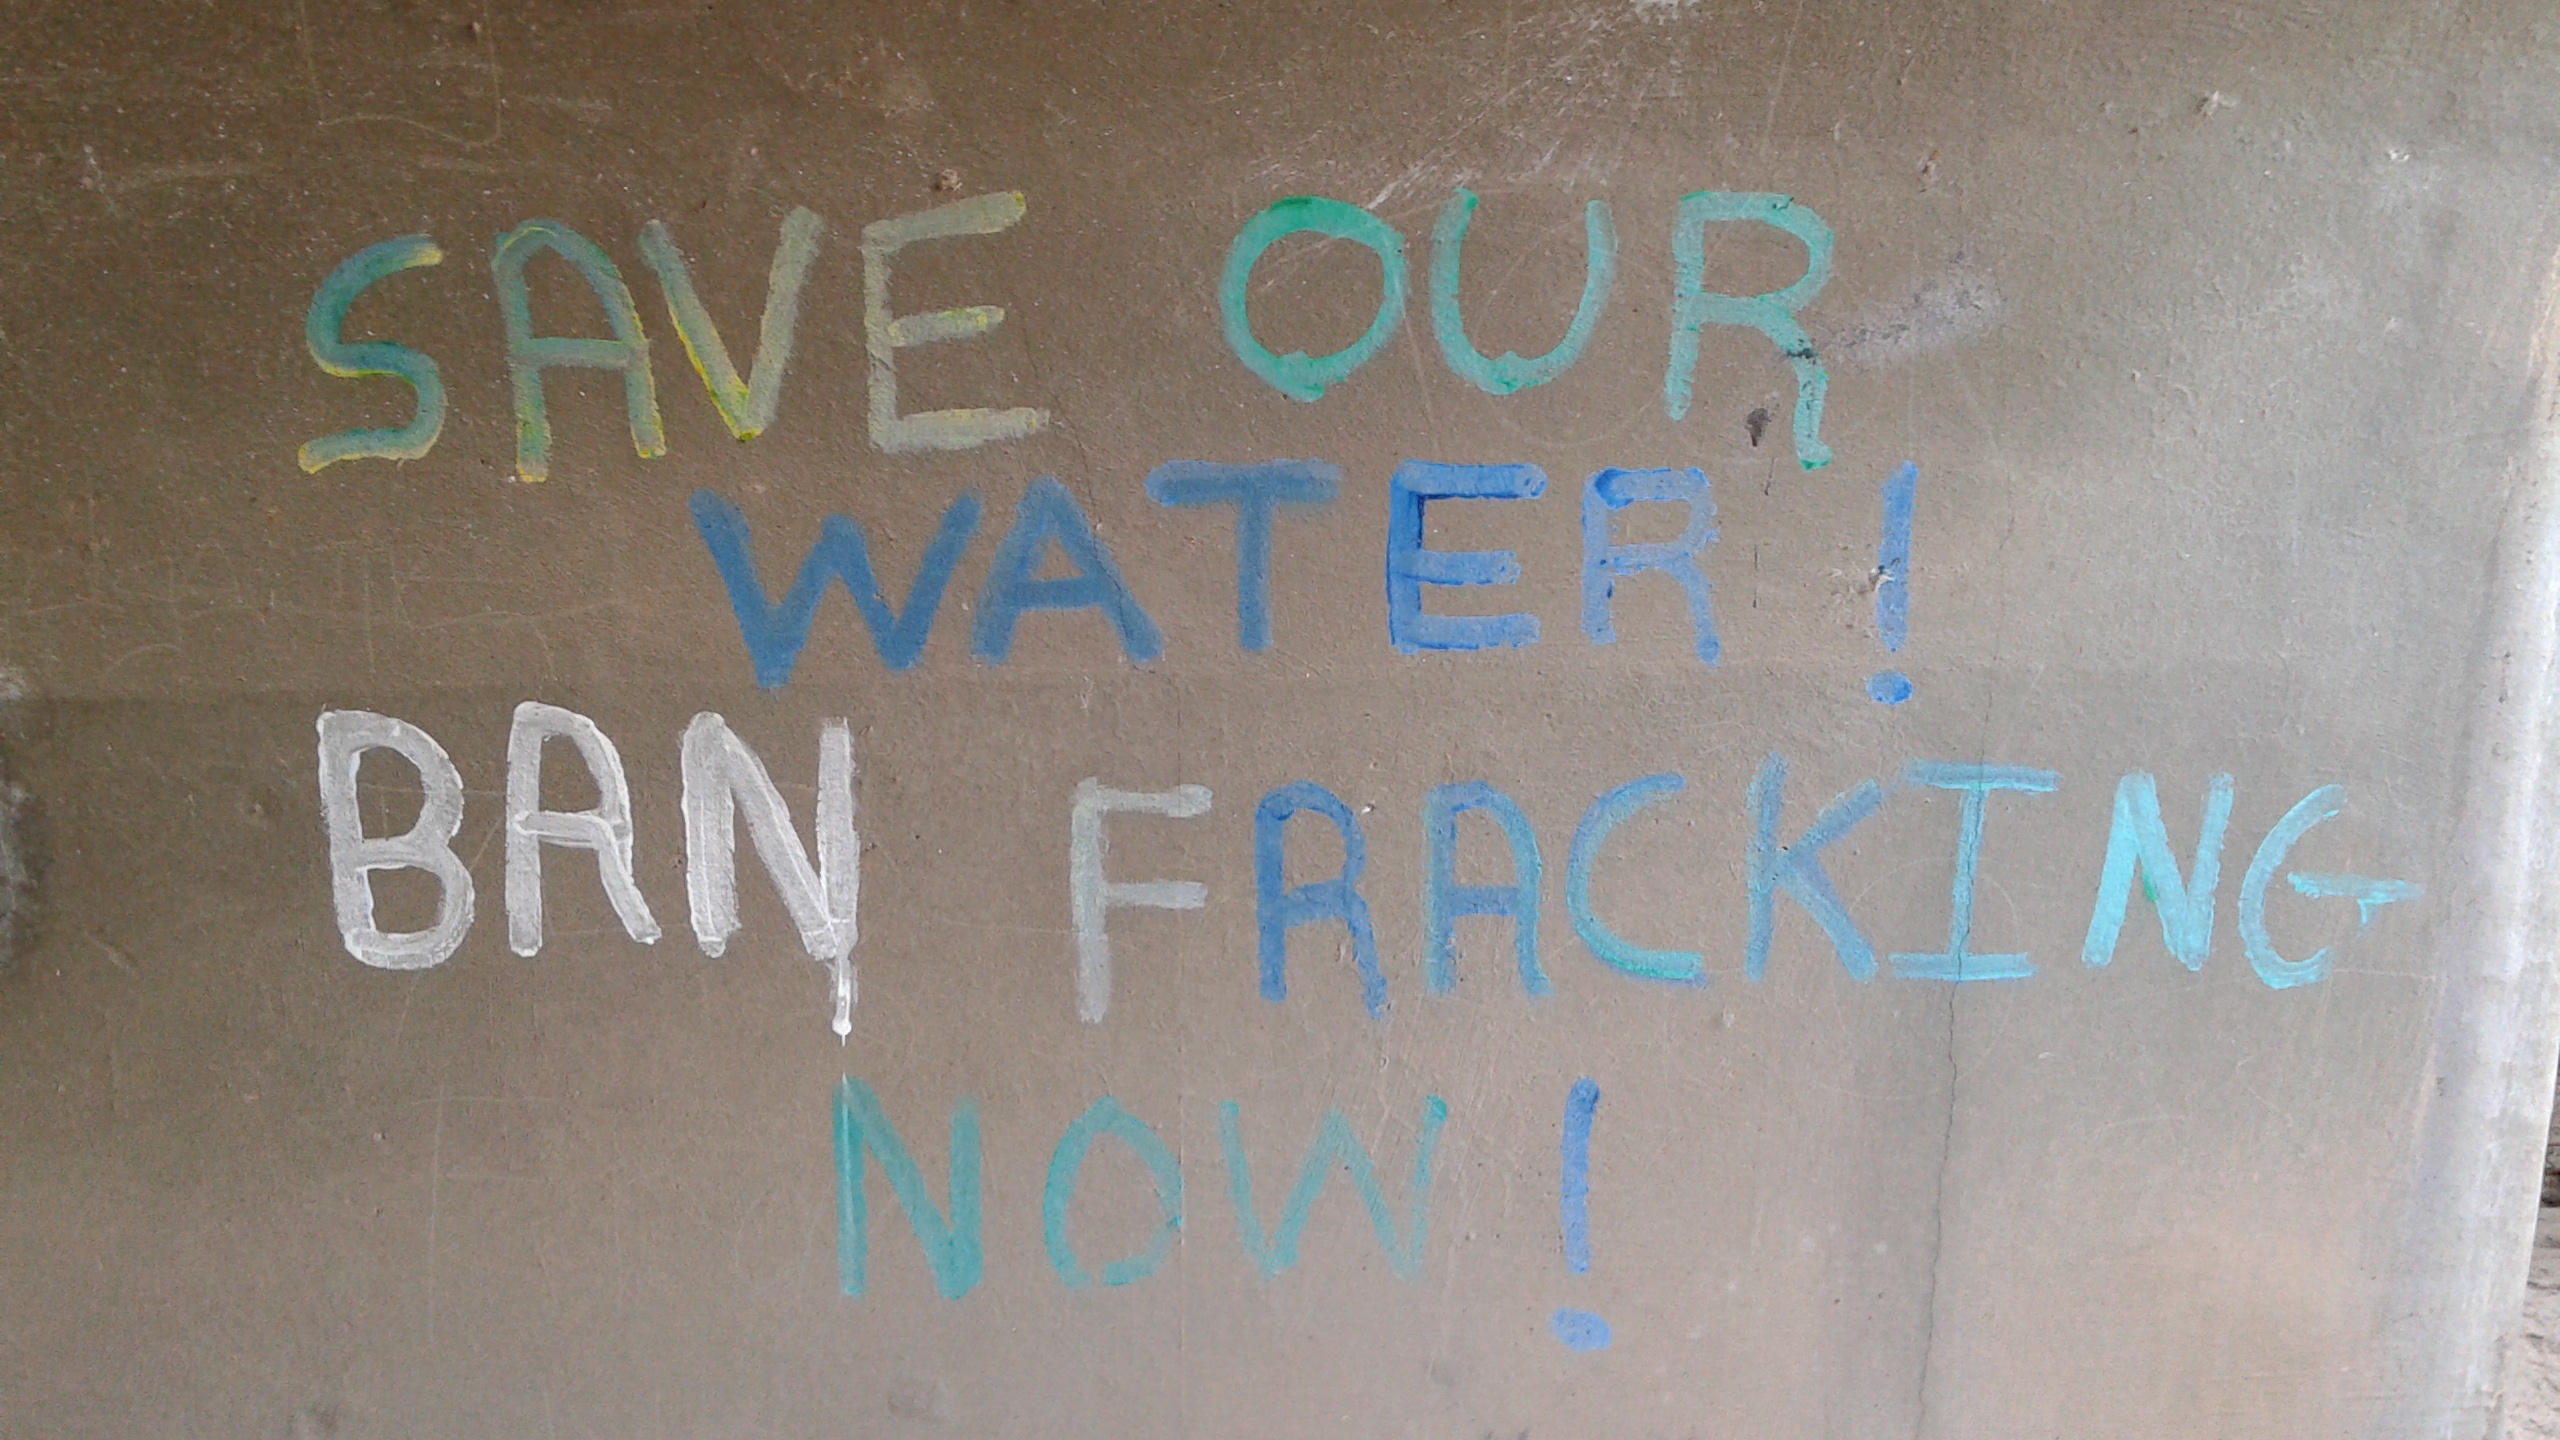 2017 'Save our Water, Ban Fracking Now' painted underside of a bridge in heart of Trump Land, Arizona, USA